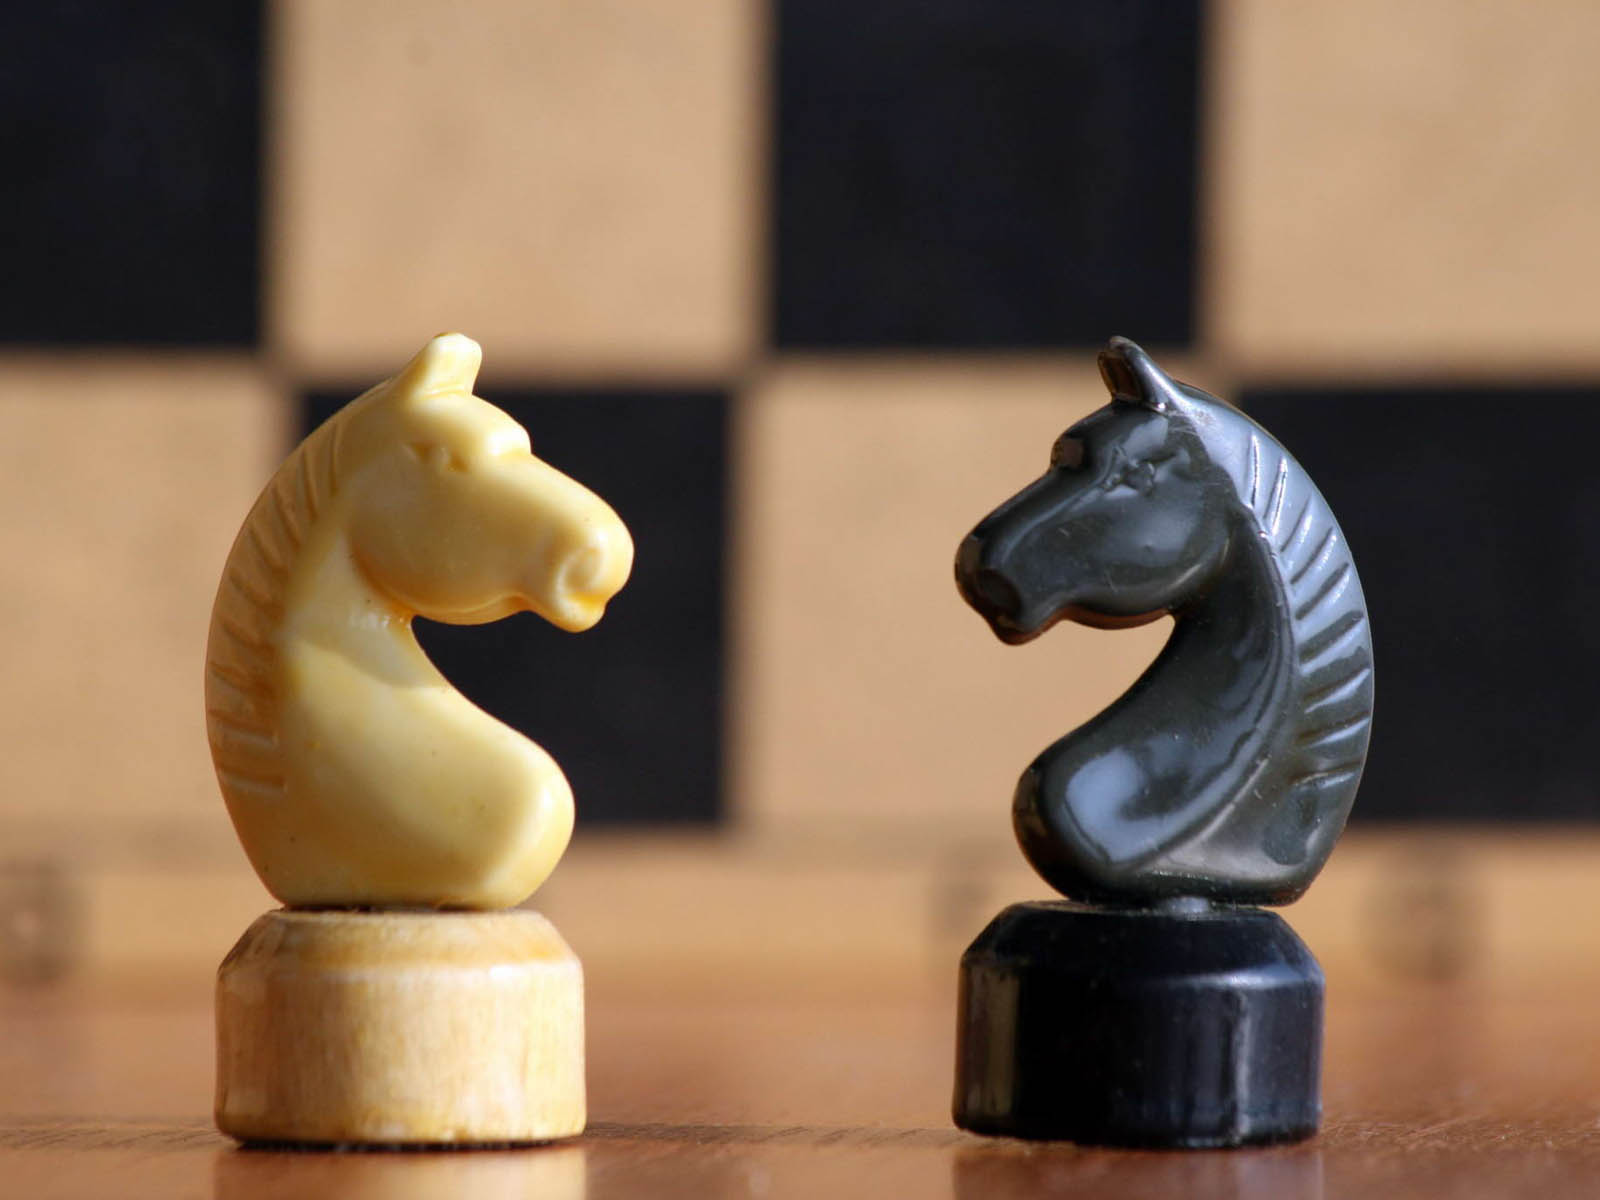 Tag Chess Horse Wallpaper Background Photos Image And Pictures